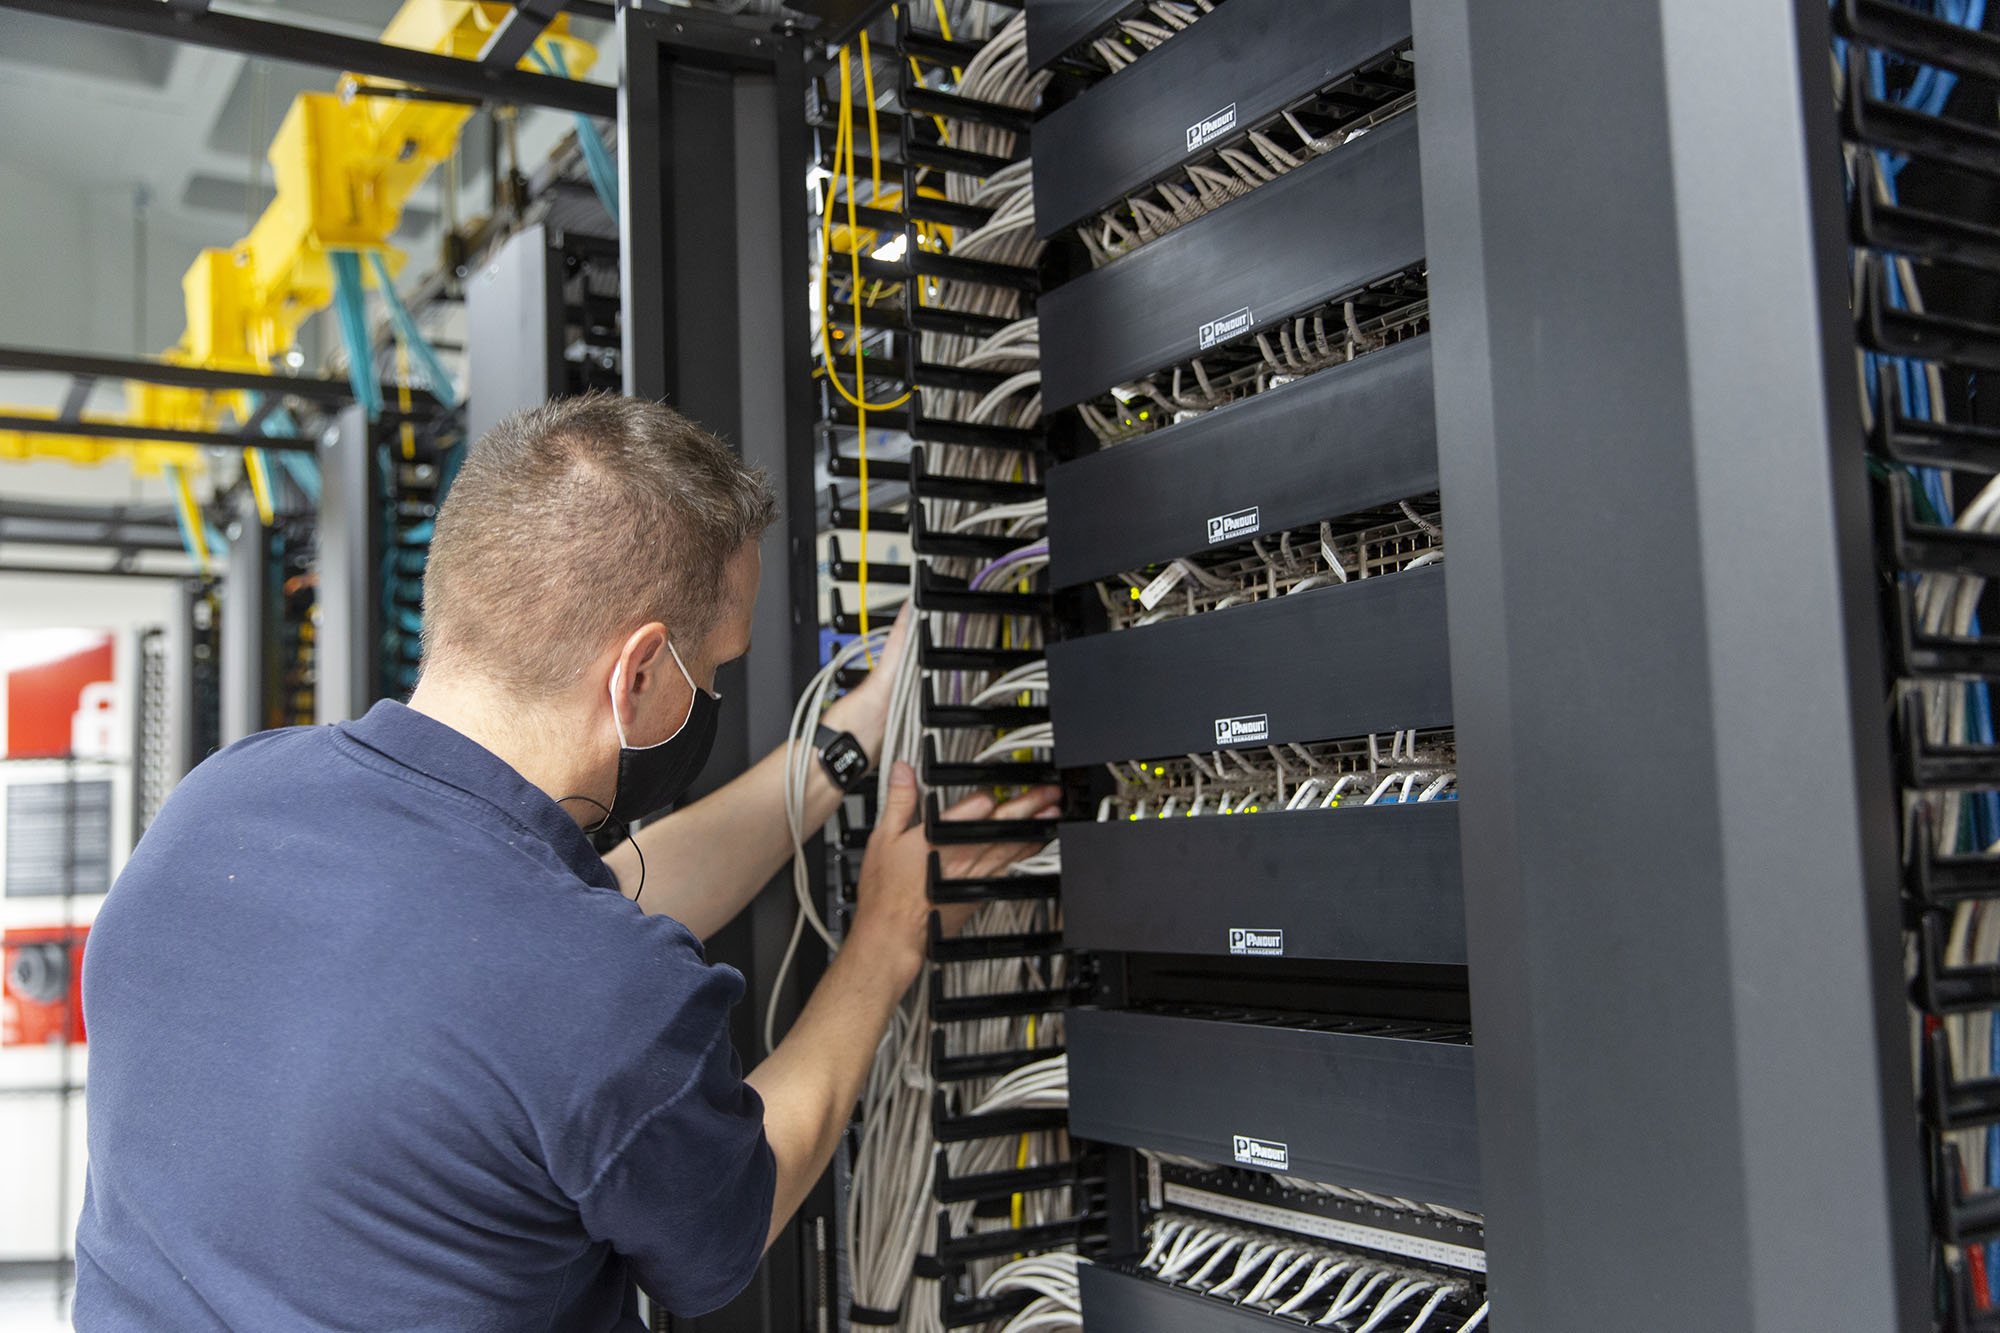 A staff member organizing network cabling.